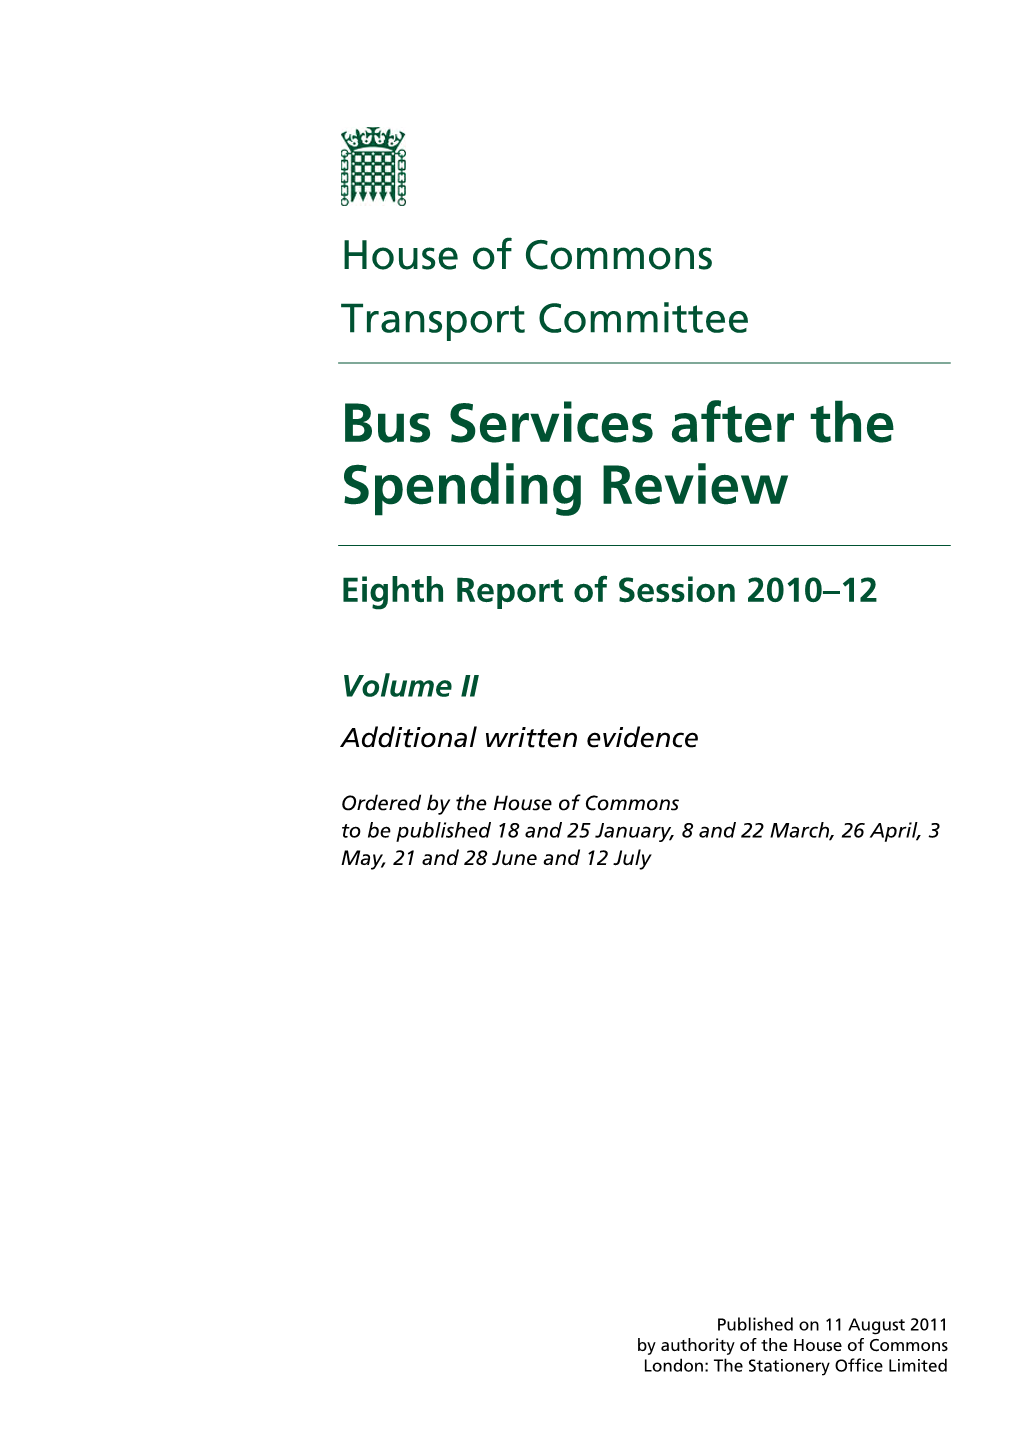 Bus Services After the Spending Review